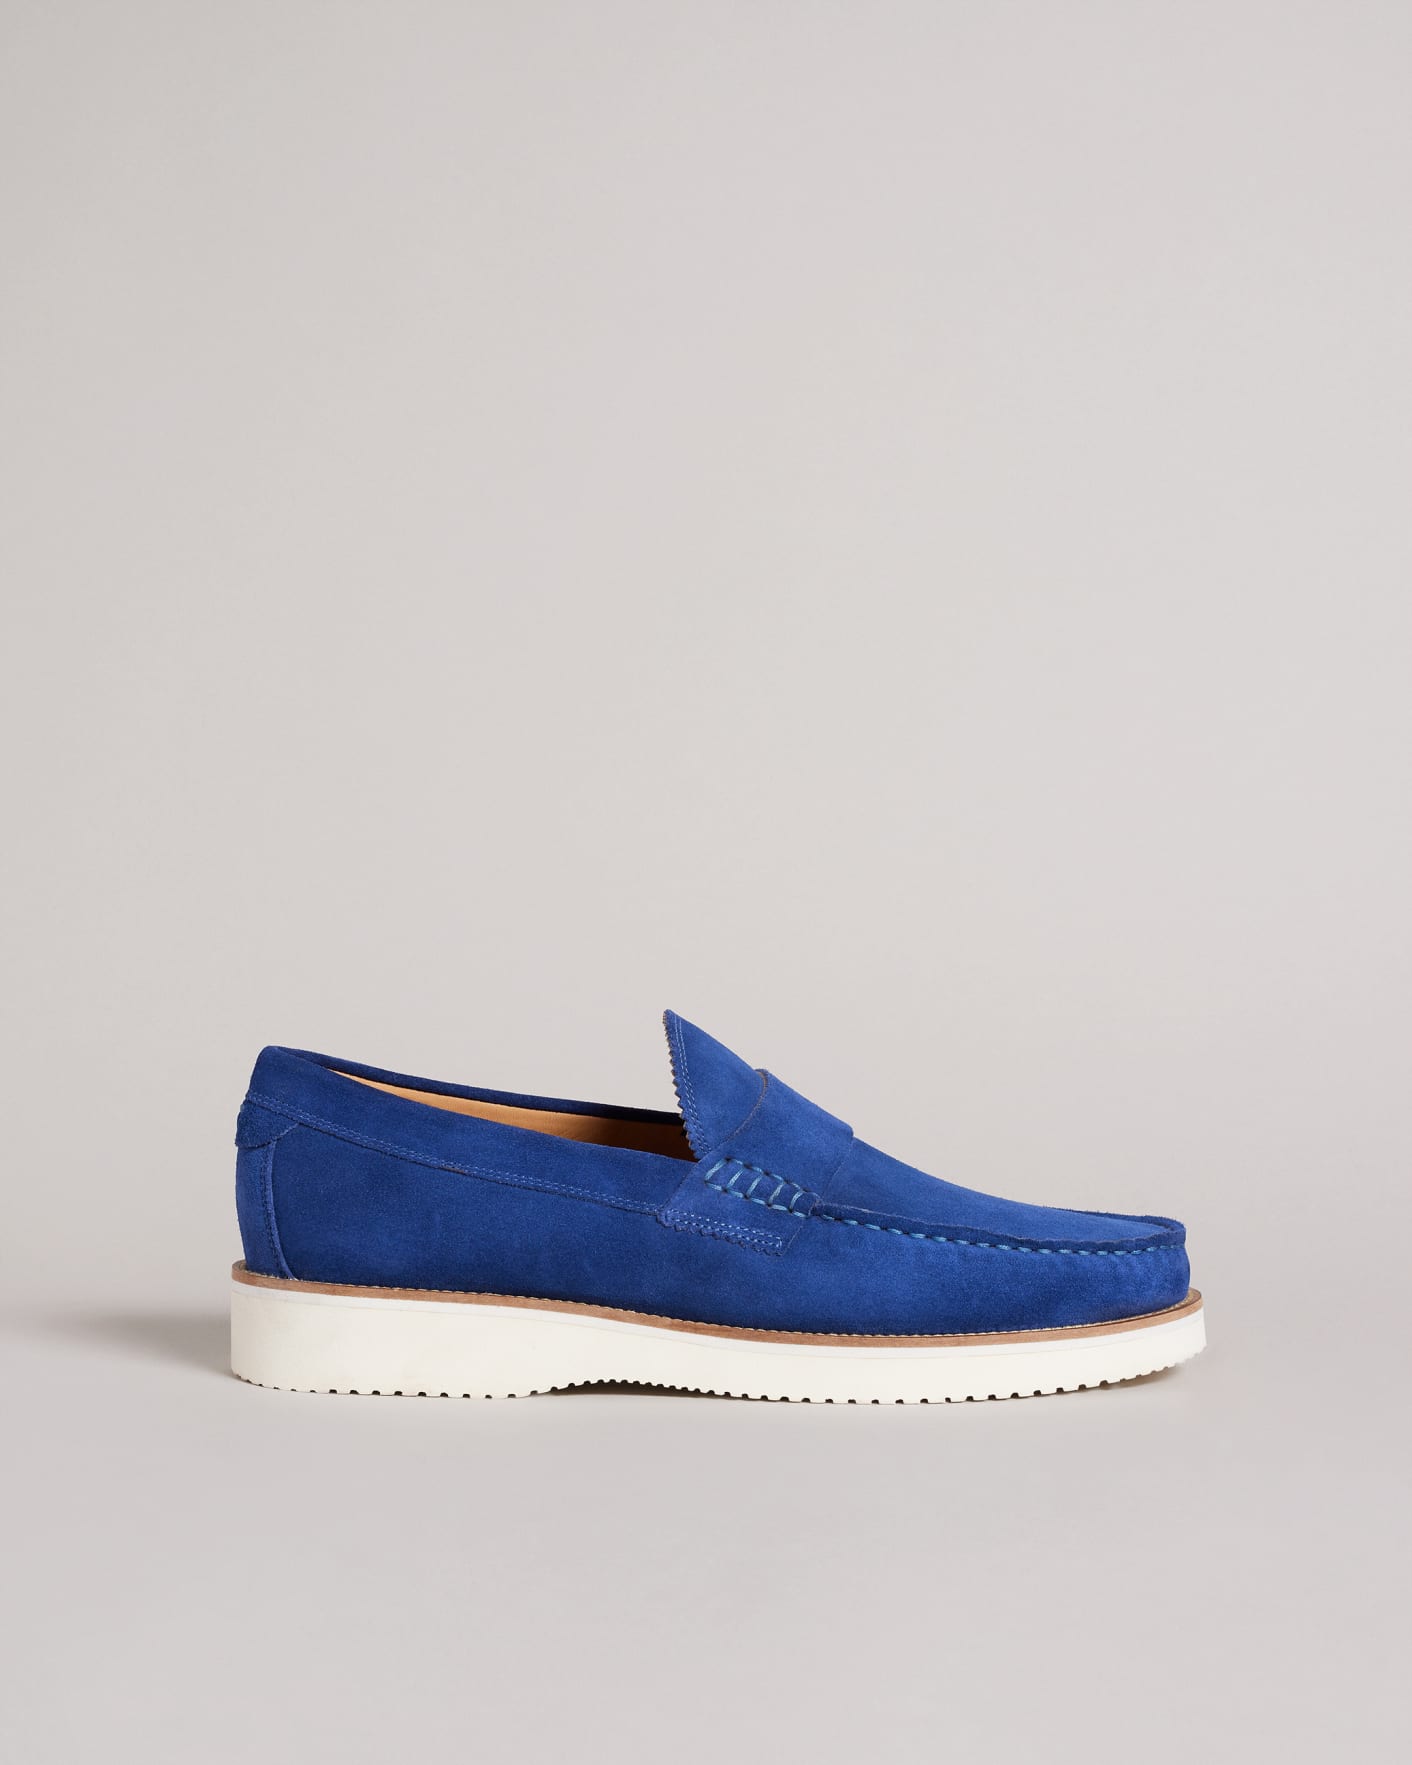 Mens Shoes Slip-on shoes Loafers Ted Baker Extralight Suede Loafers in Blue for Men 